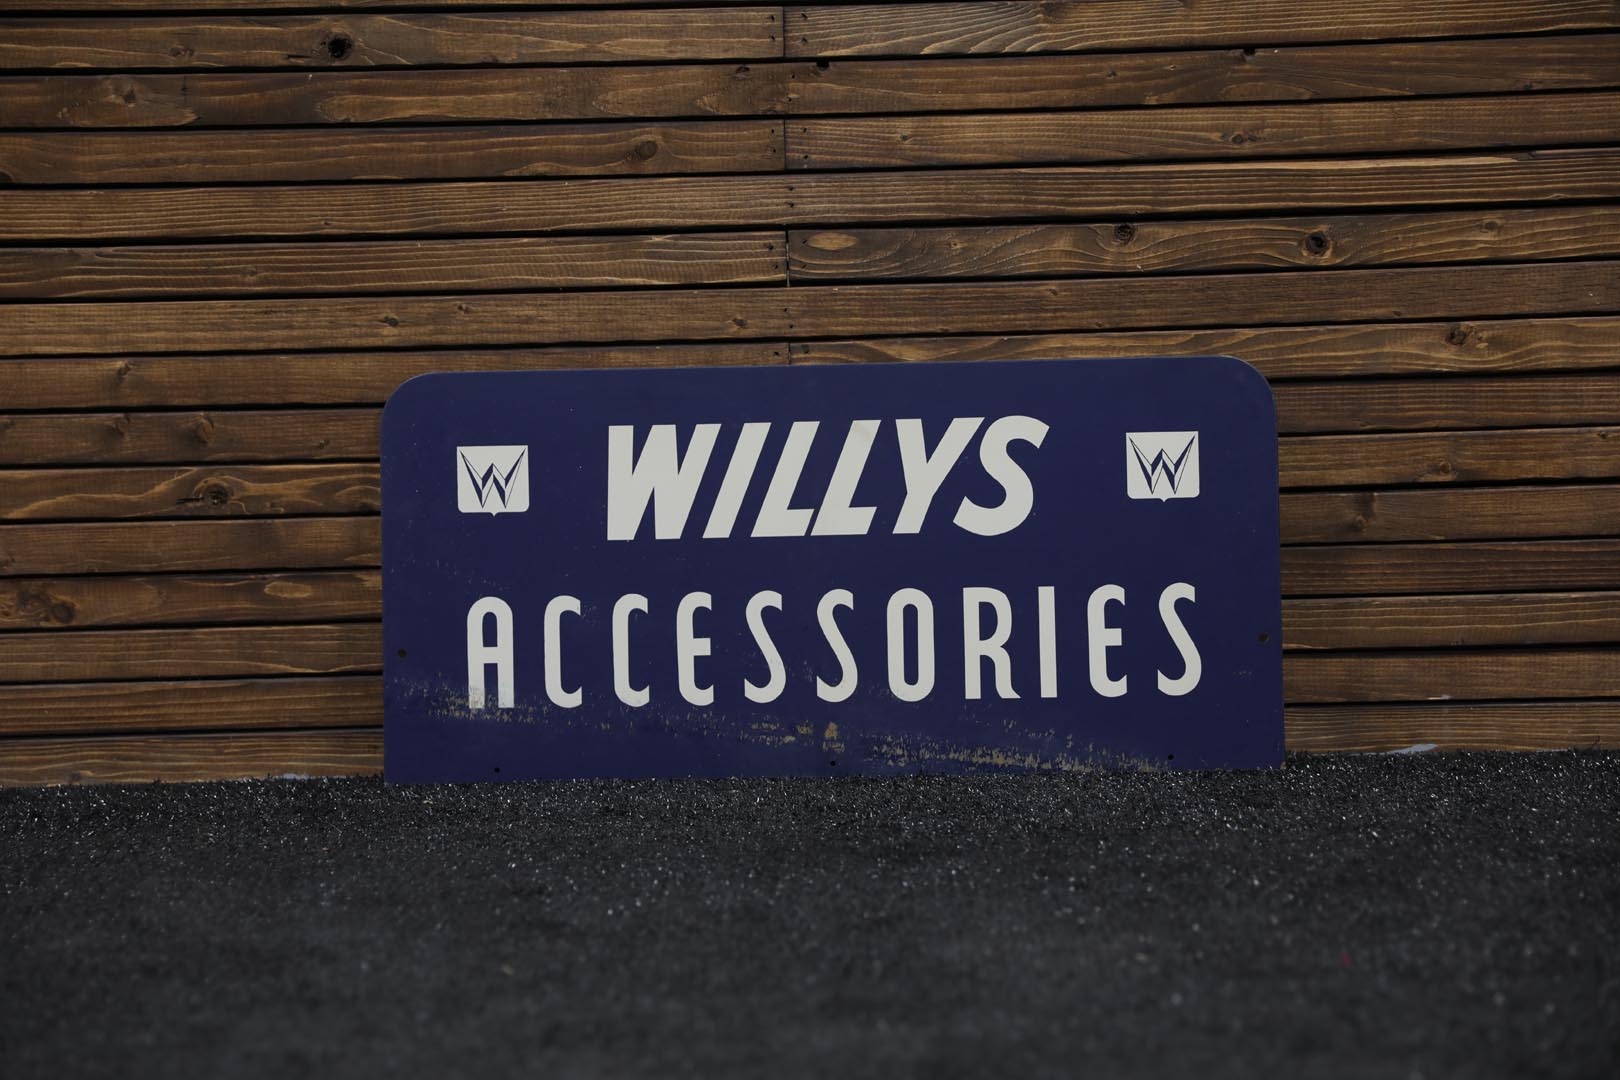  Late 1940s Original Willys Acc essories Dealership Sign 